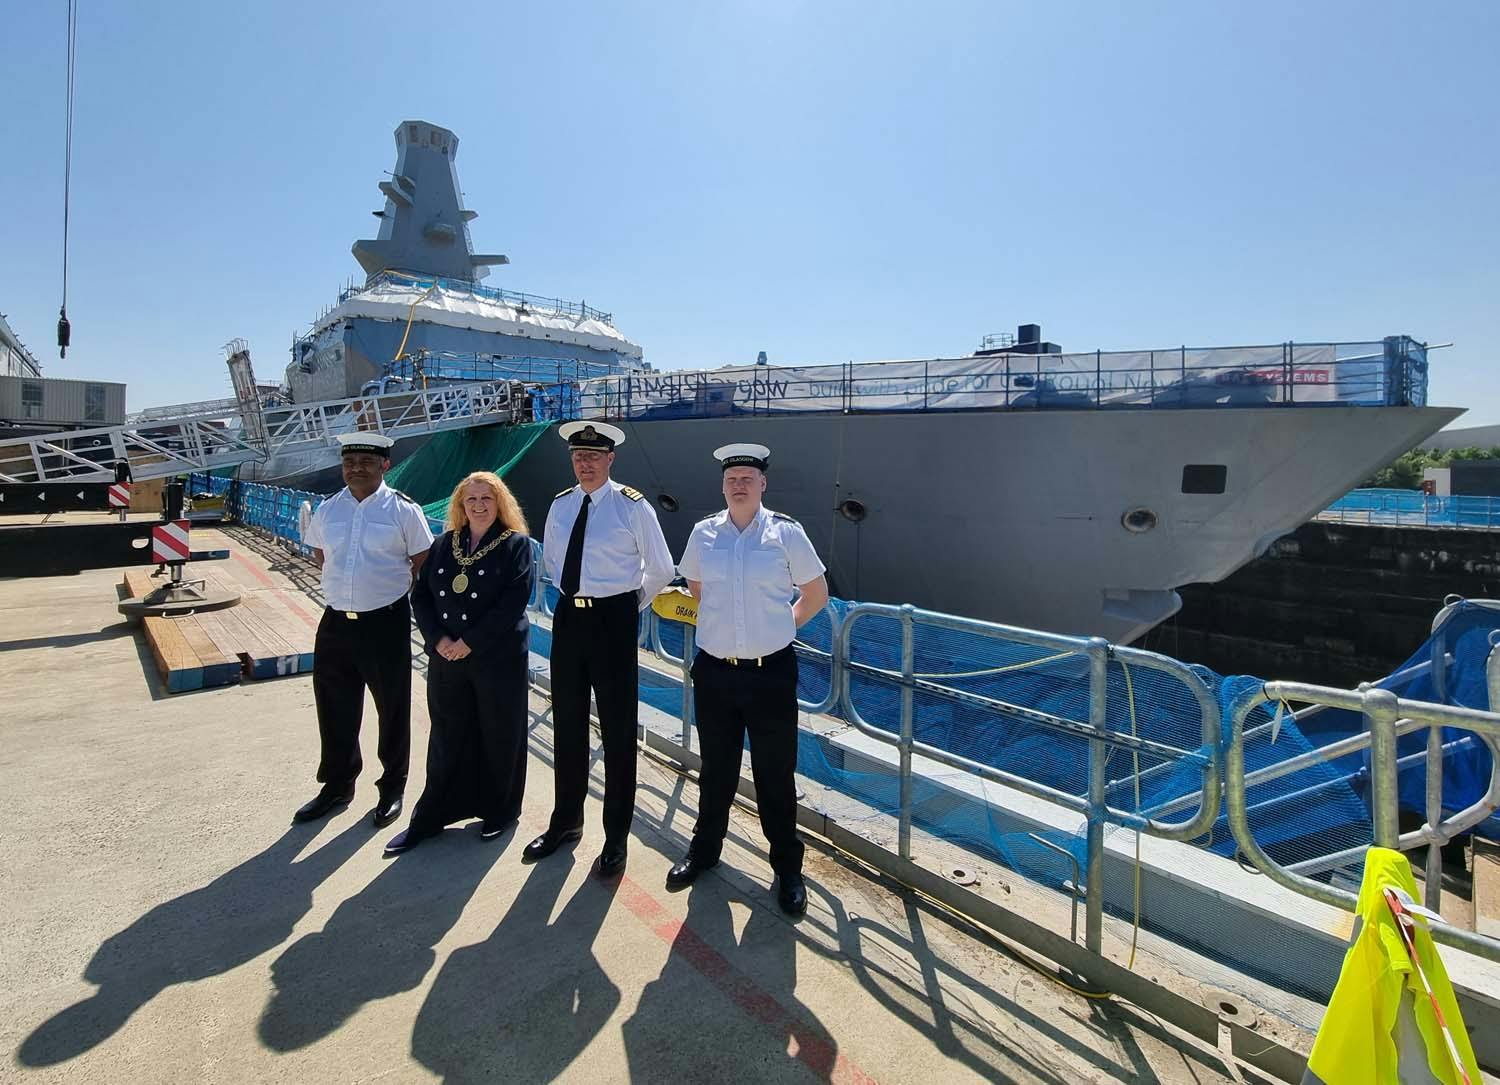 Lord Provost of Glasgow impressed by new warship